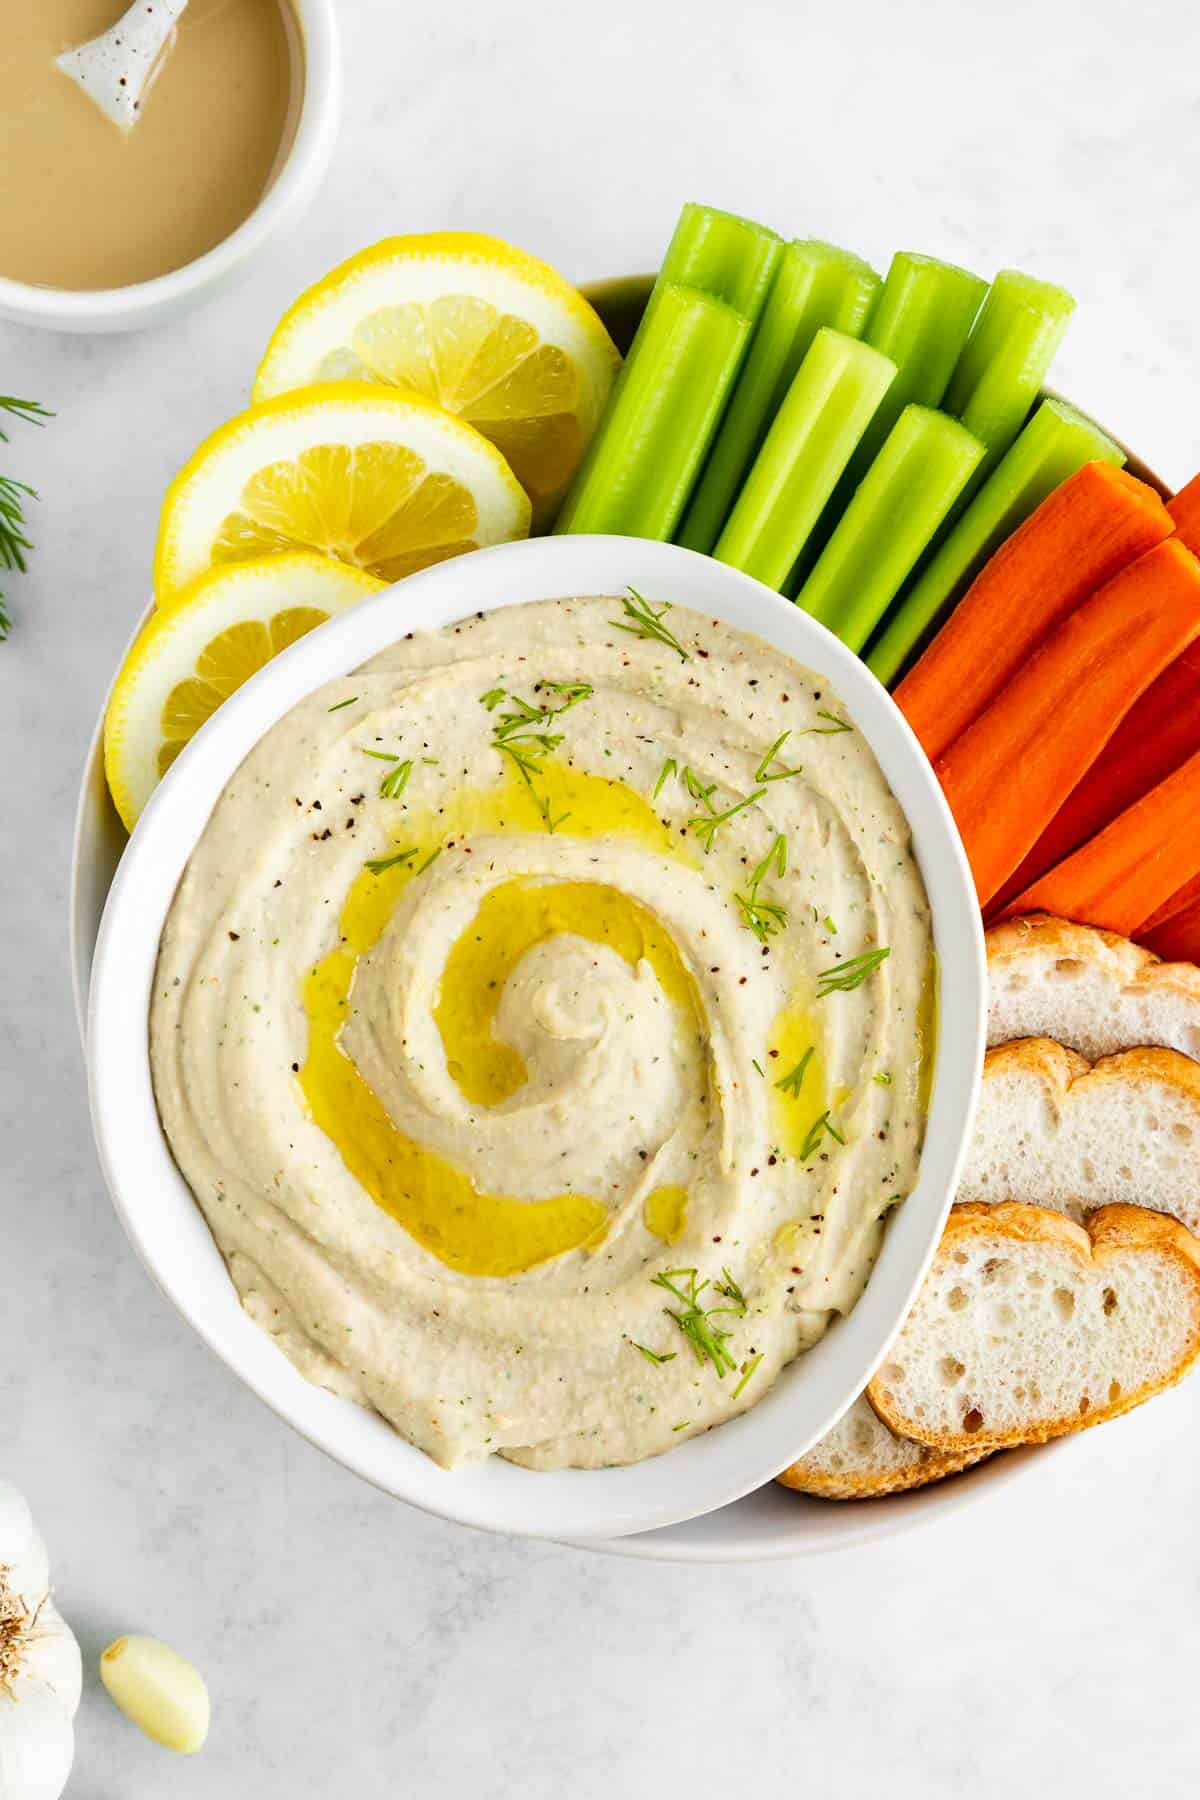 white bean dip in a white bowl with carrots, celery, bread, and lemon